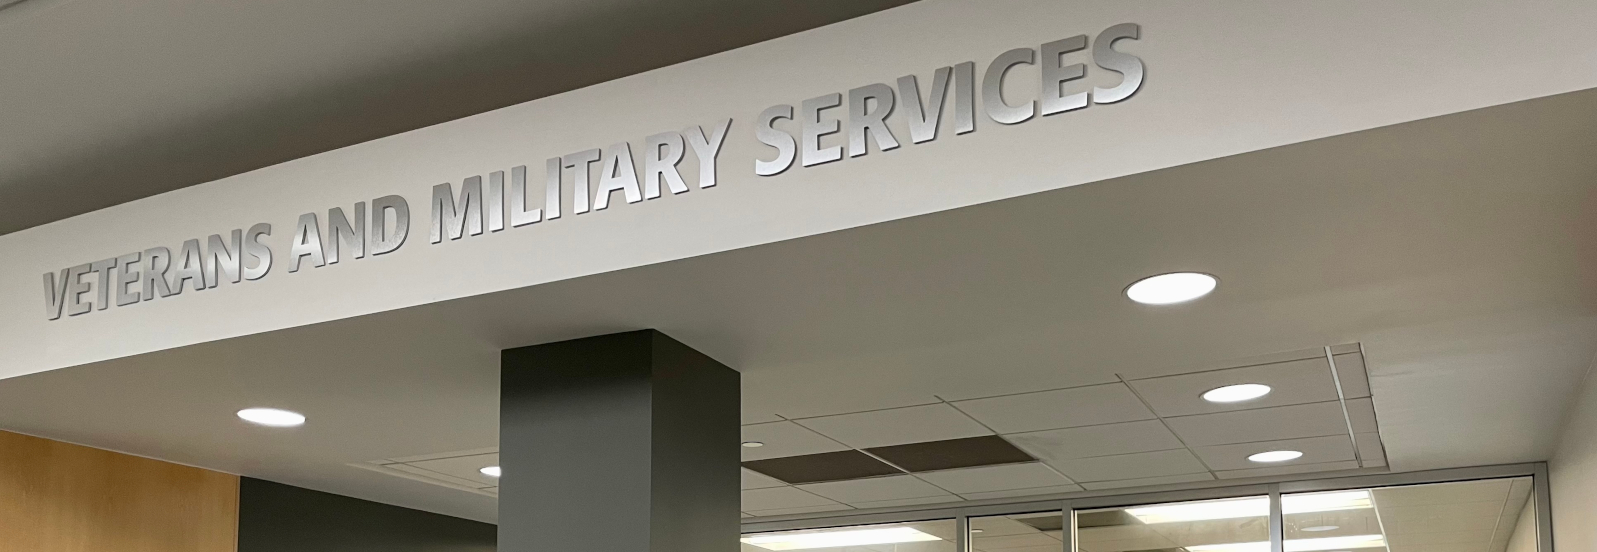 Veterans & Military Student Services